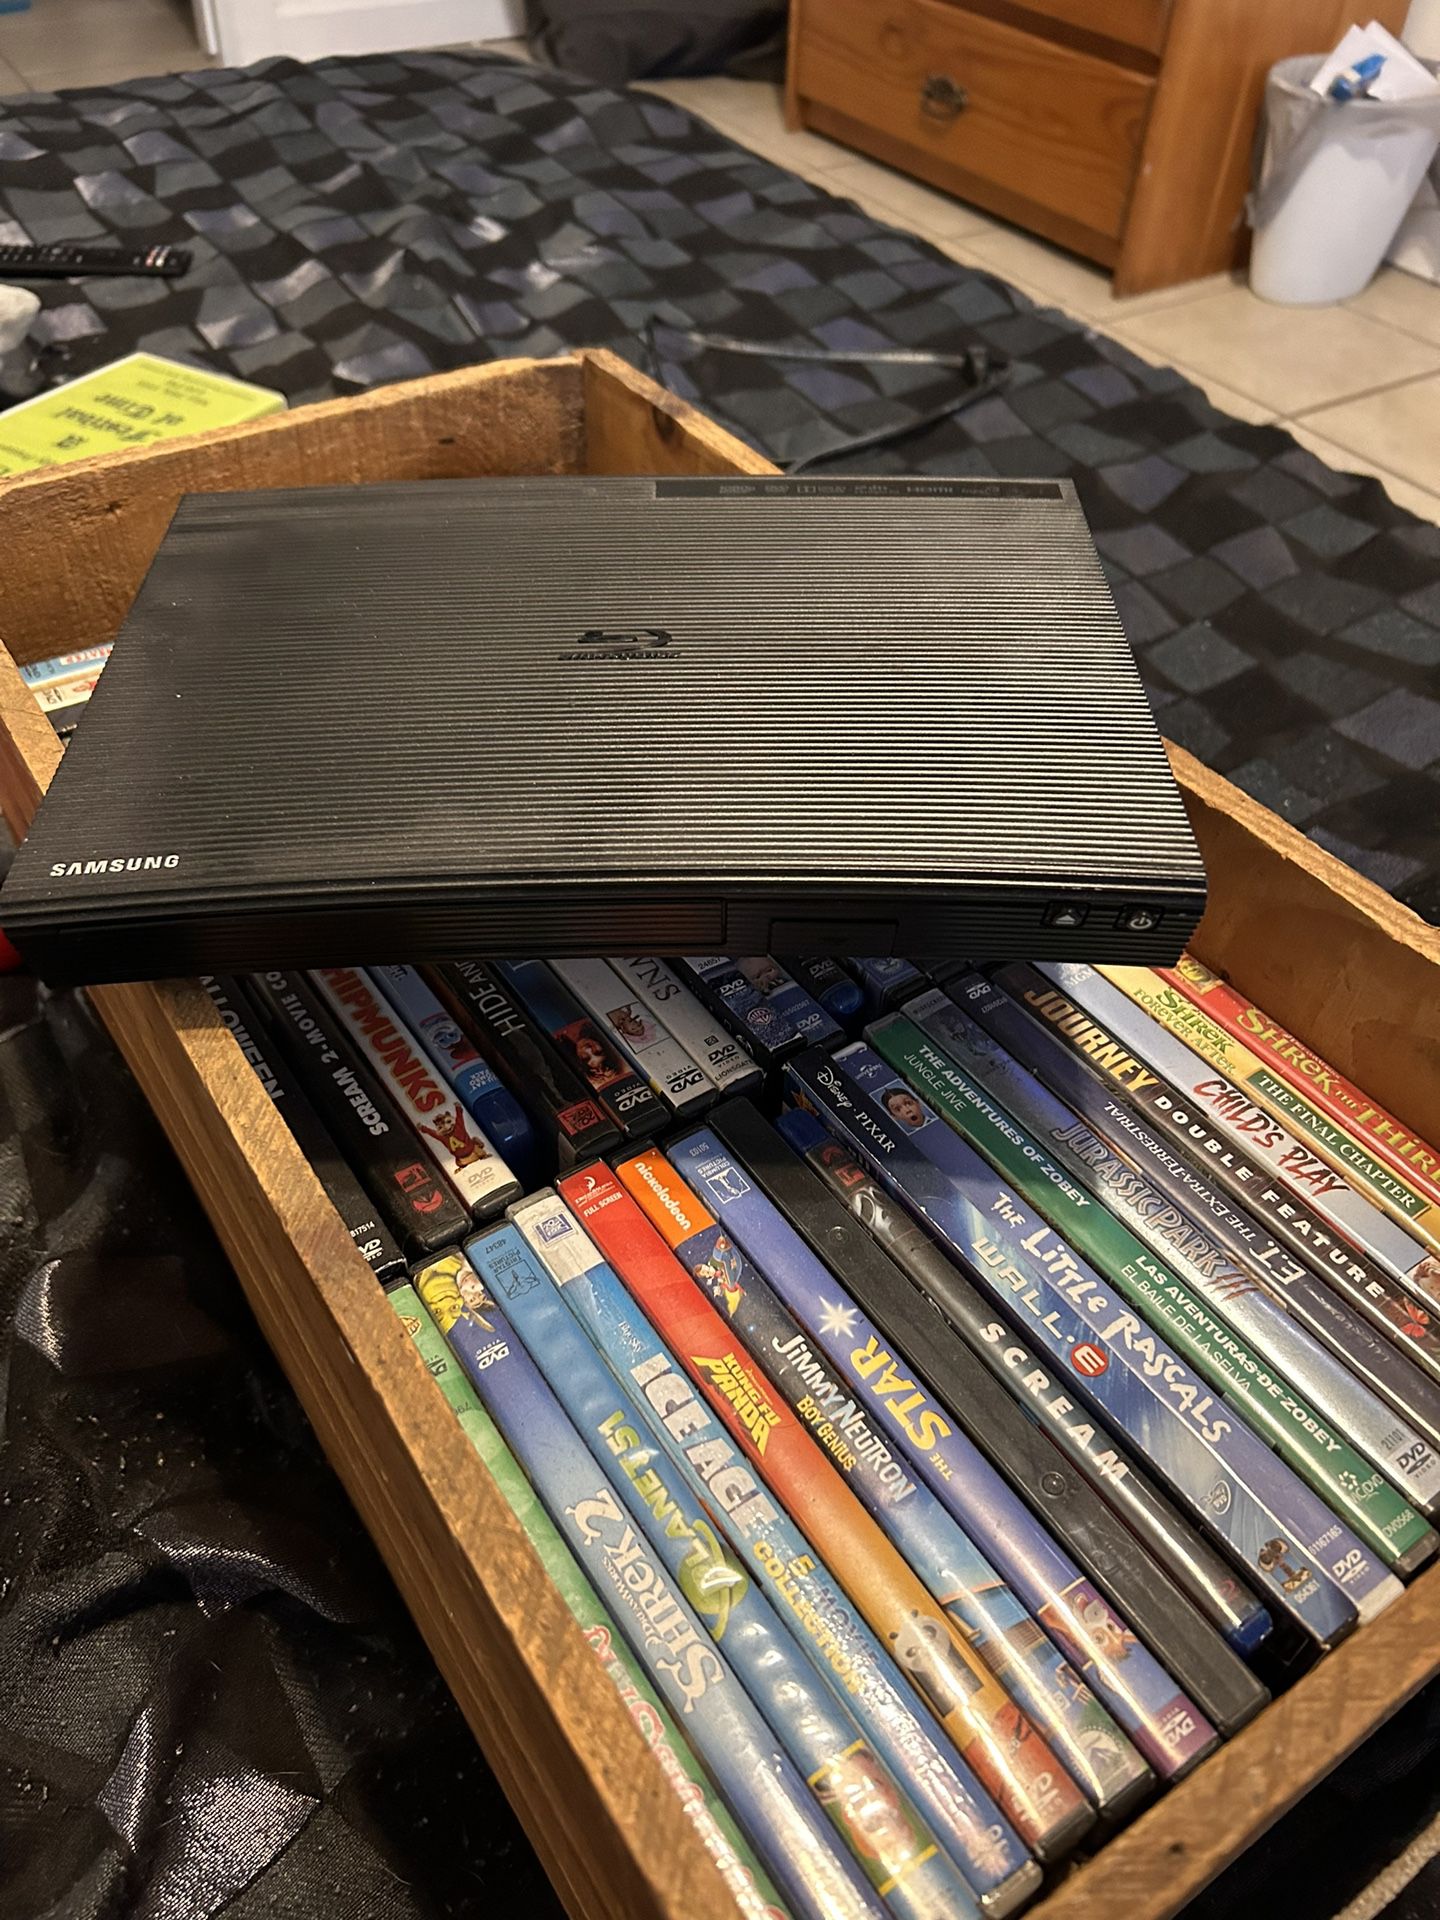 Samsung Blu-ray DVD Player With DVDs